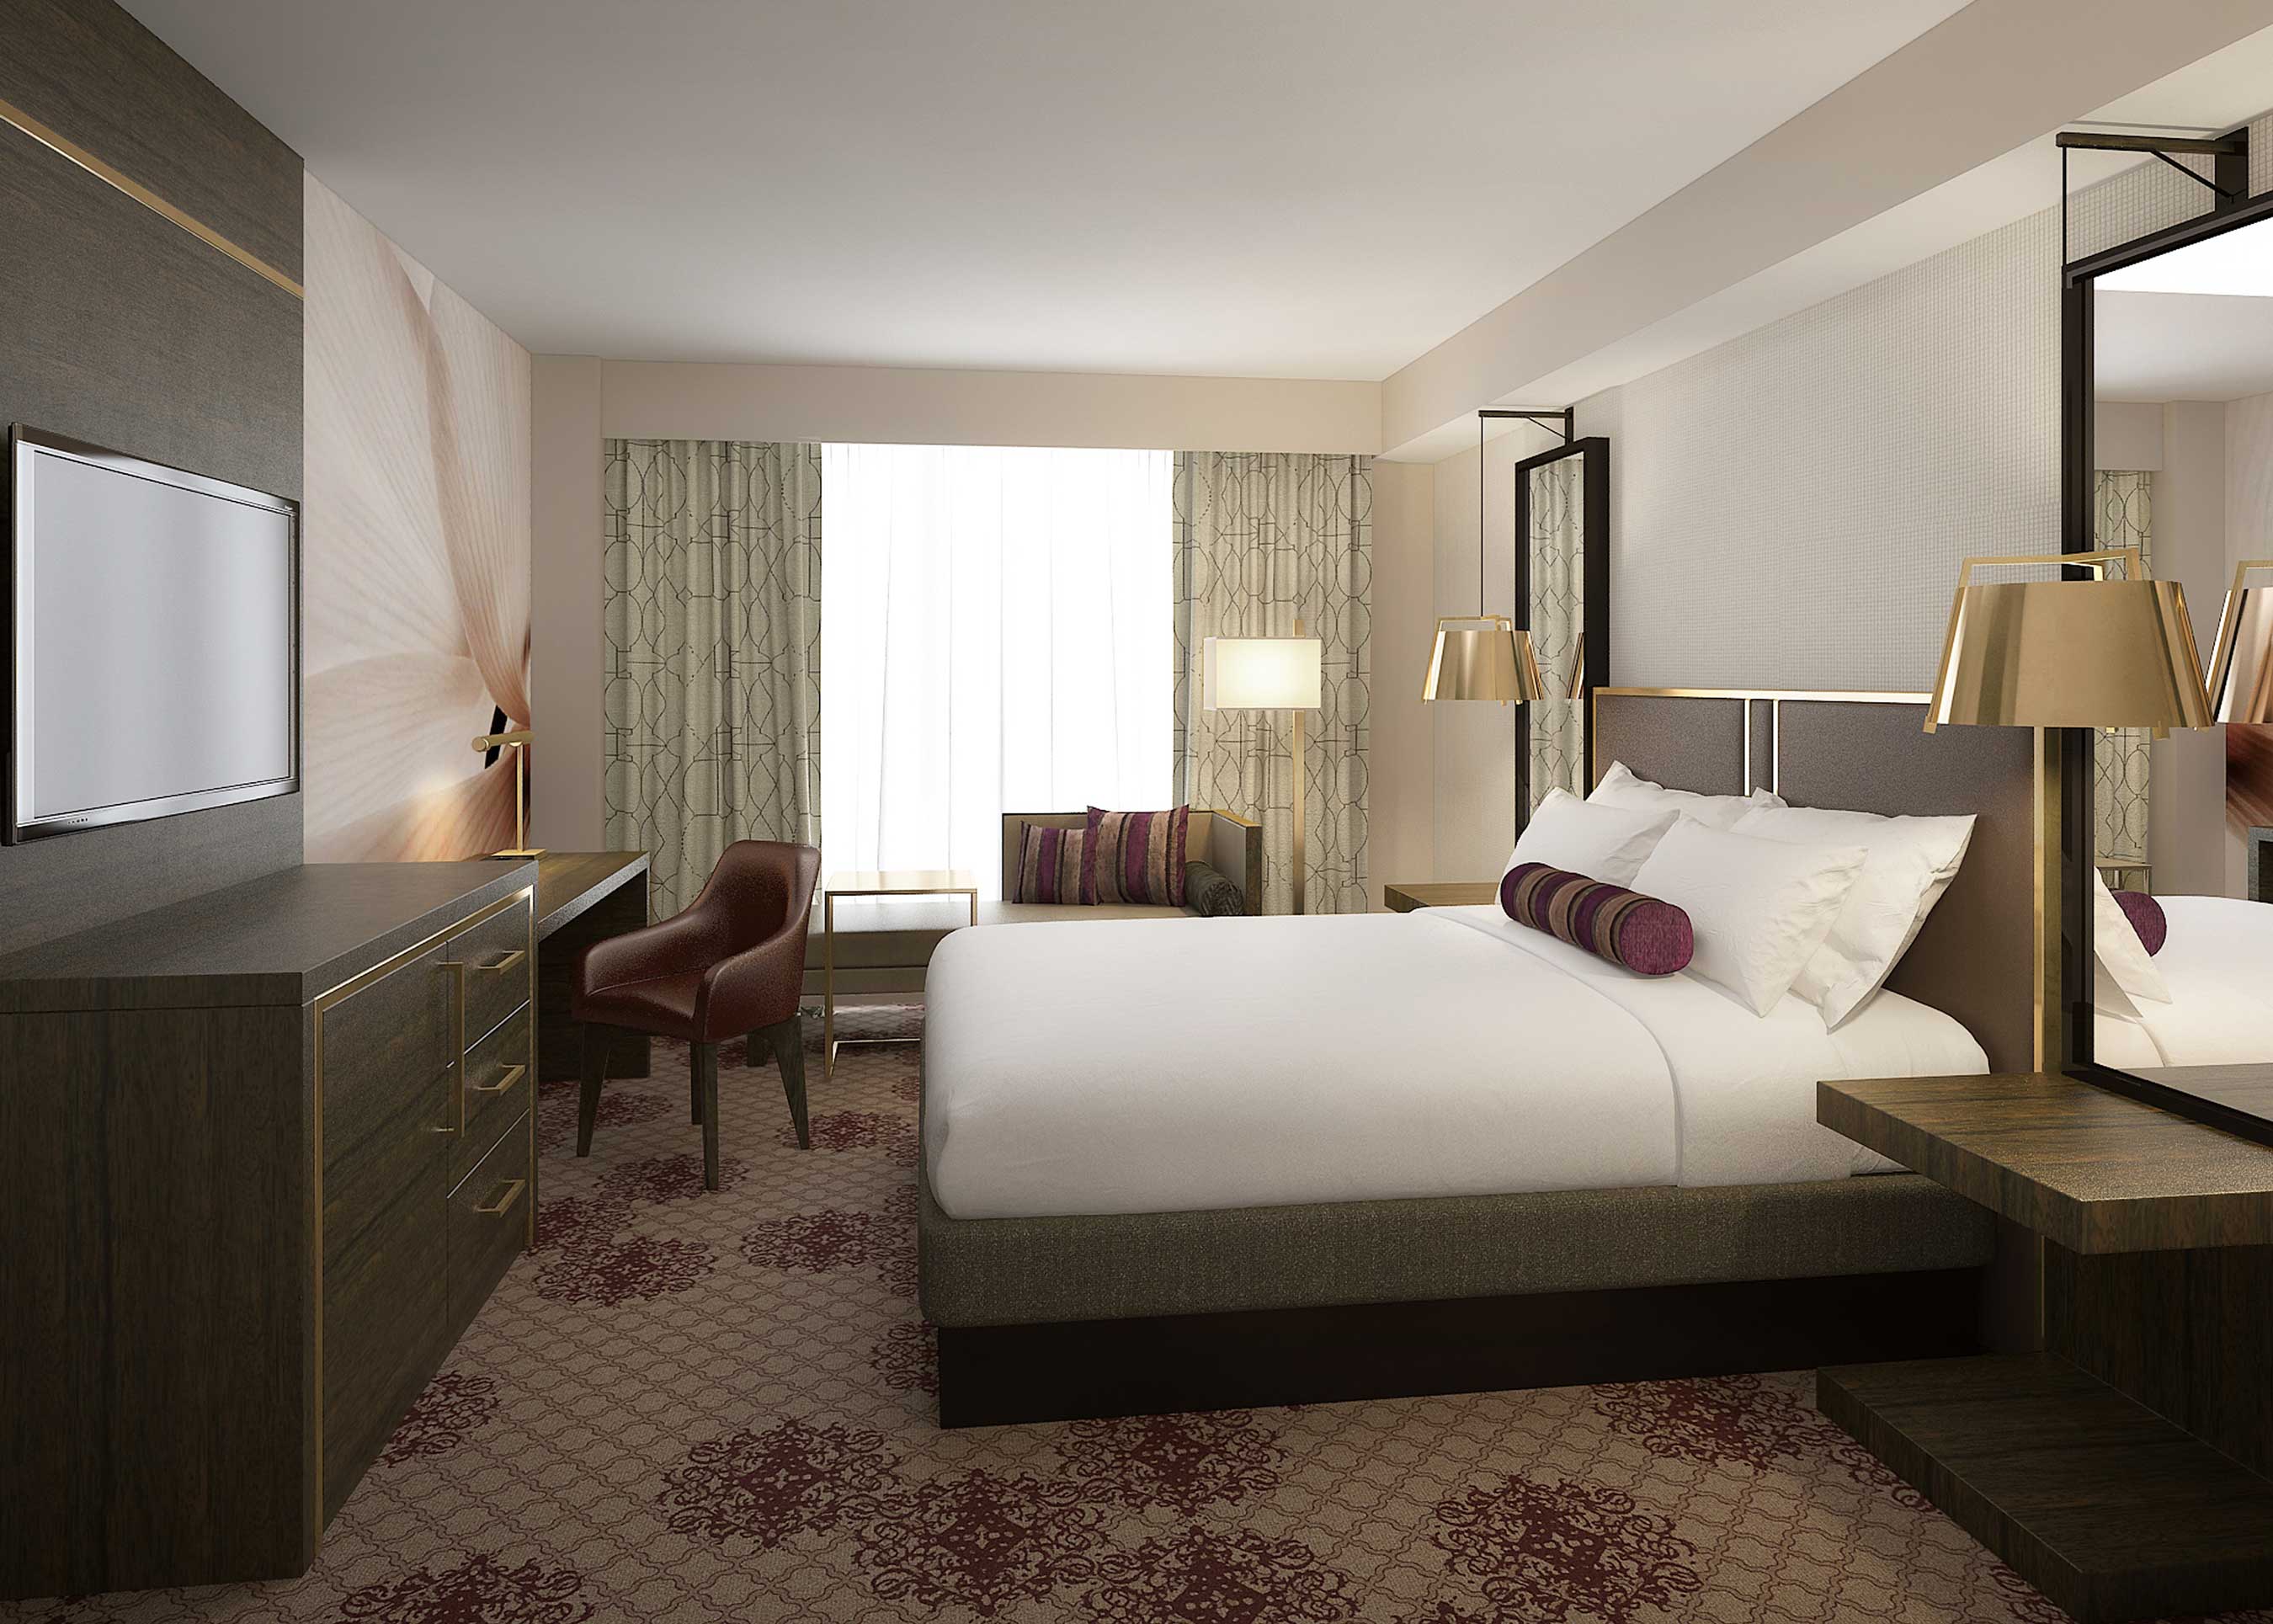 Influenced by the opulence of Eldorado, the mythical South American City of Gold, the design of new guestrooms at Eldorado Reno reflects a refined and luxurious design aesthetic.